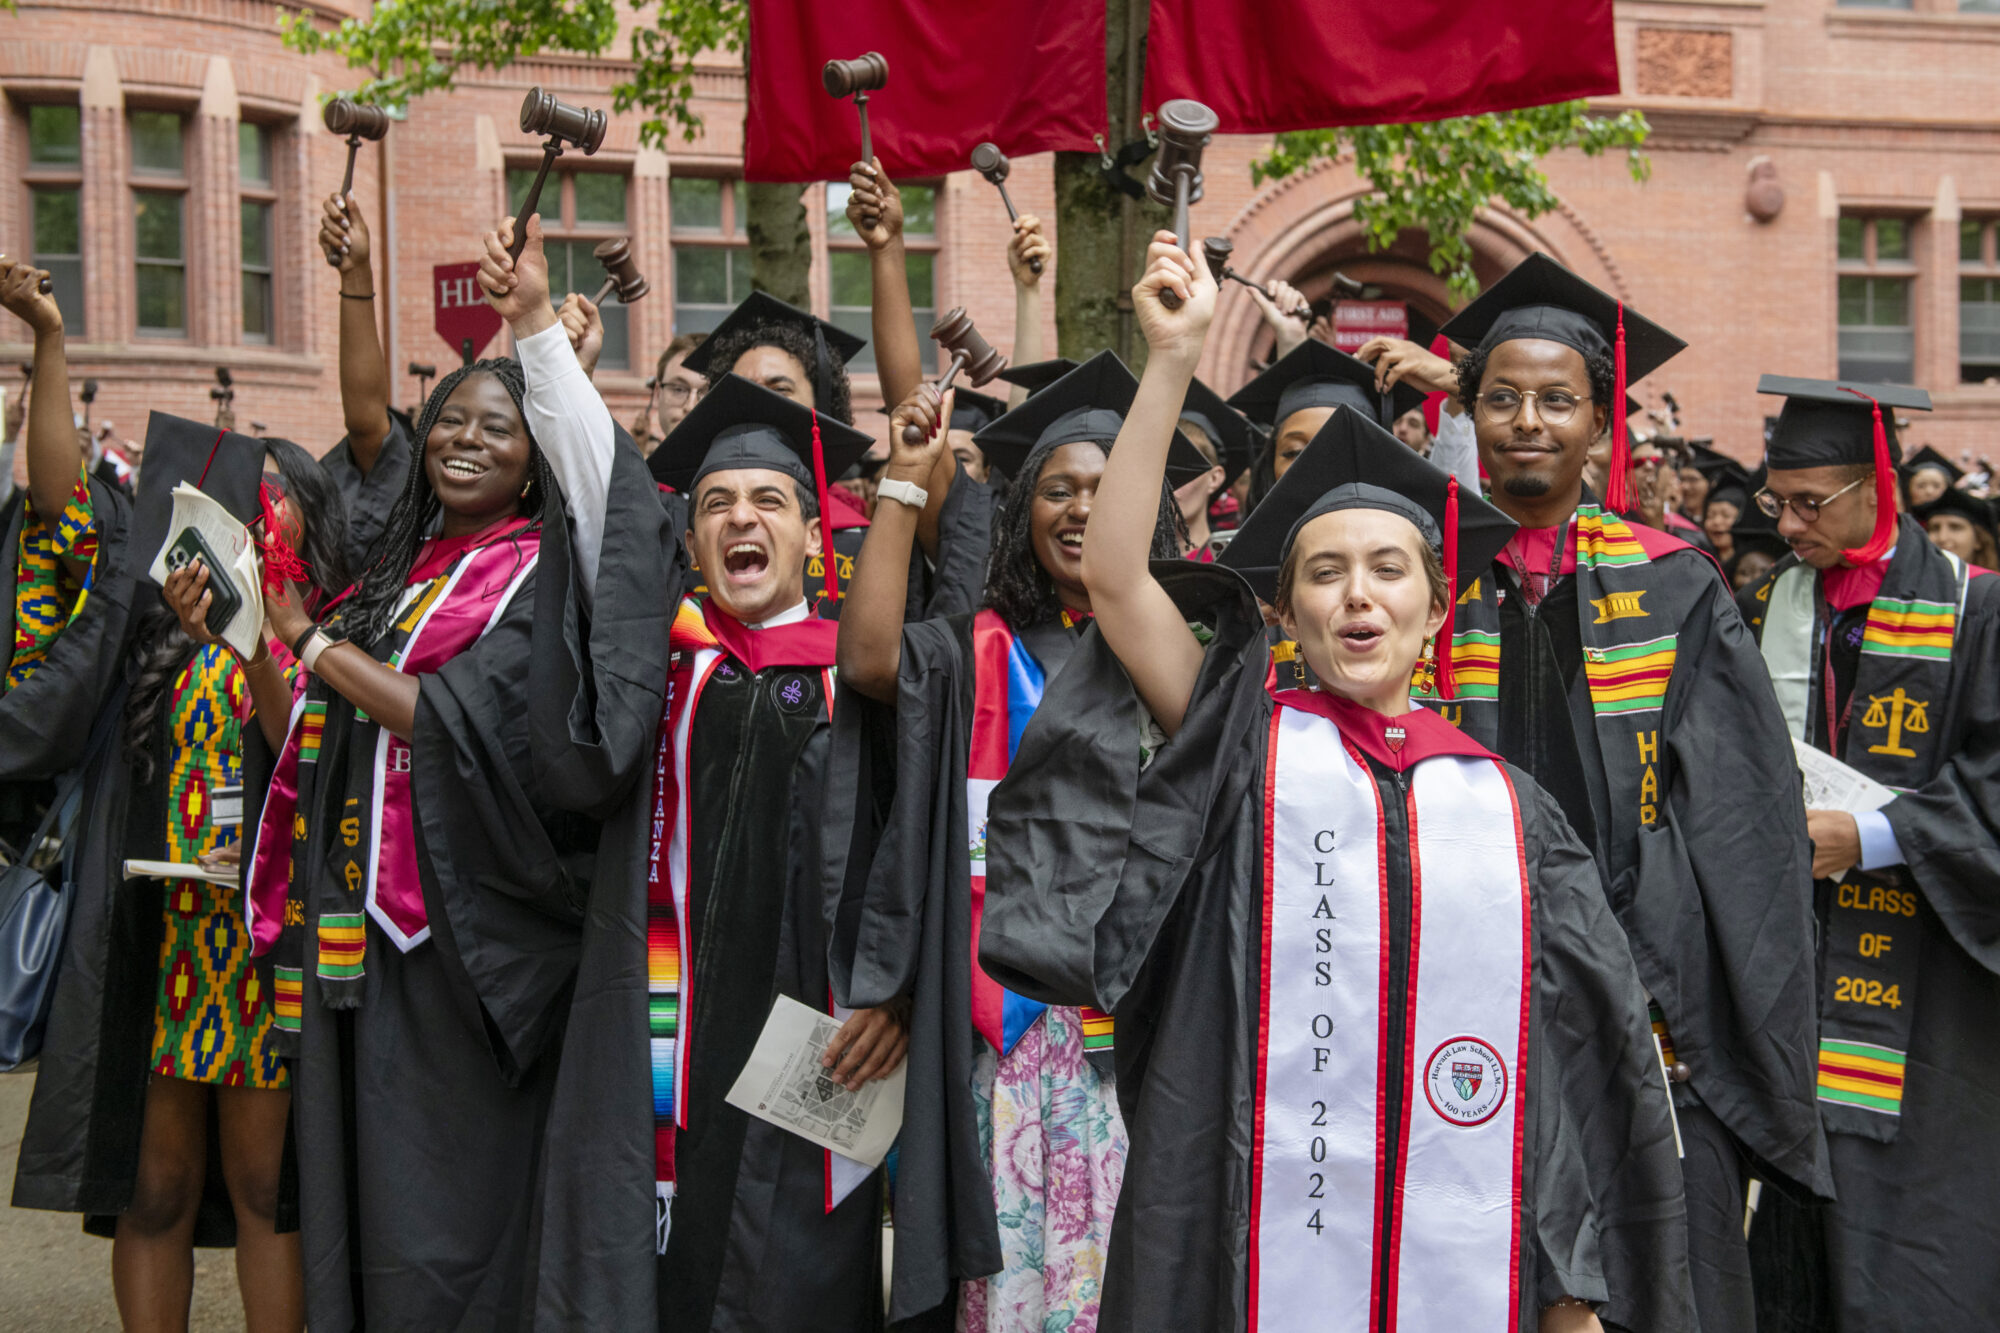 Harvard Law School students in cap and gown with gavels